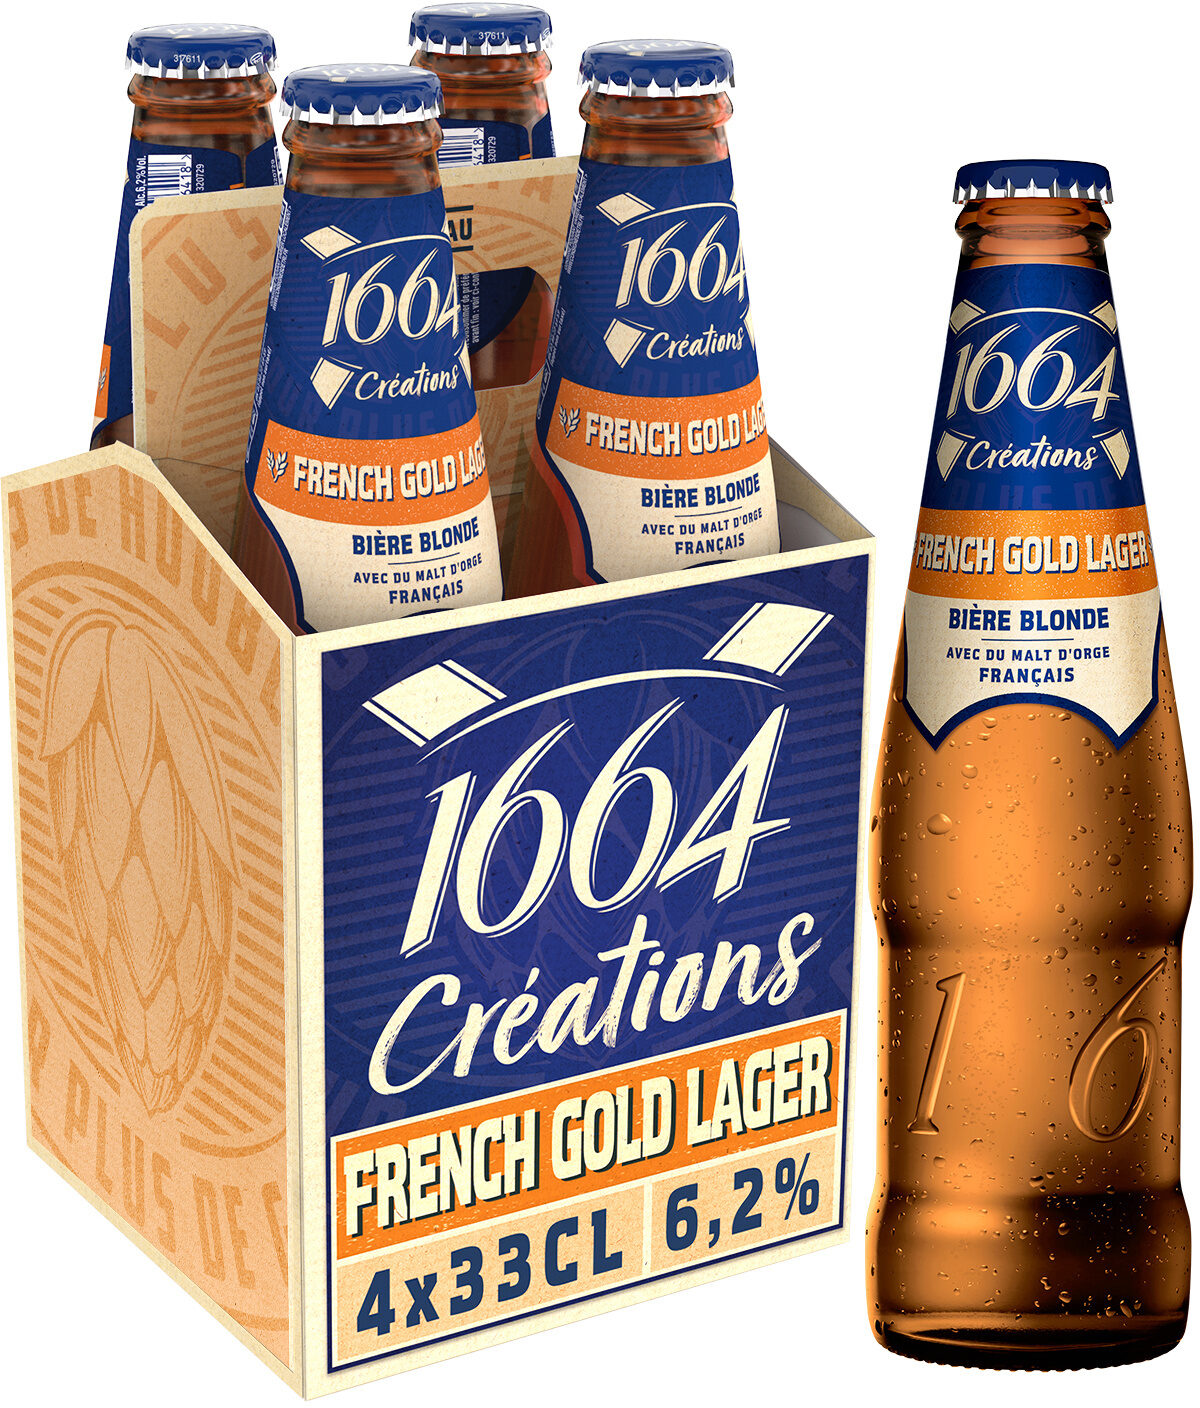 1664 4x33cl 1664 creations french gold 6.2 degre alcool - Produit